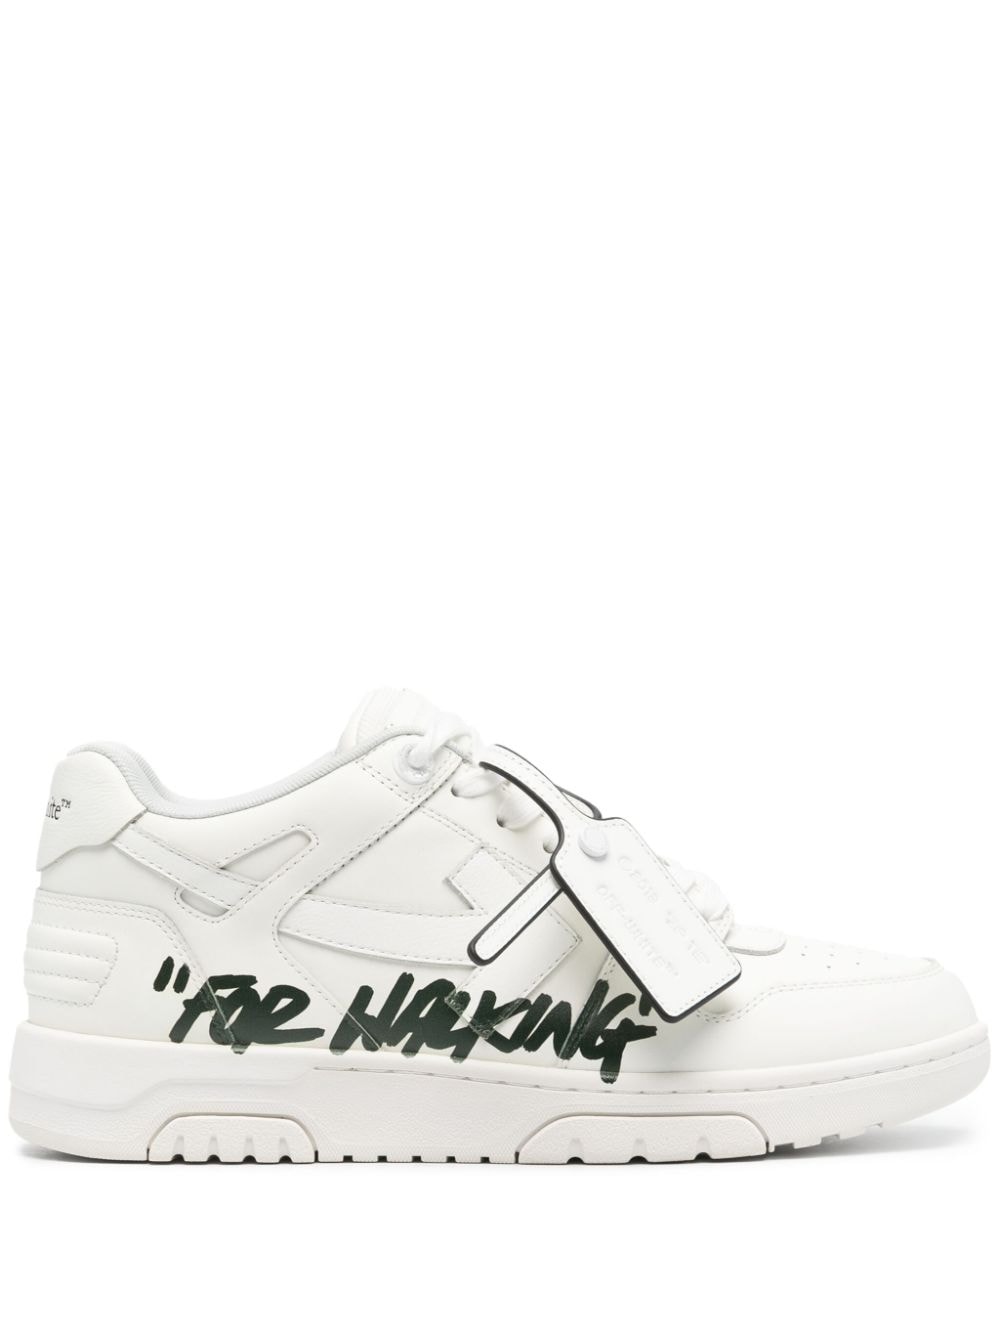 Off-White Out of Office For Walking Sneakers - 0110 WHITE BLACK